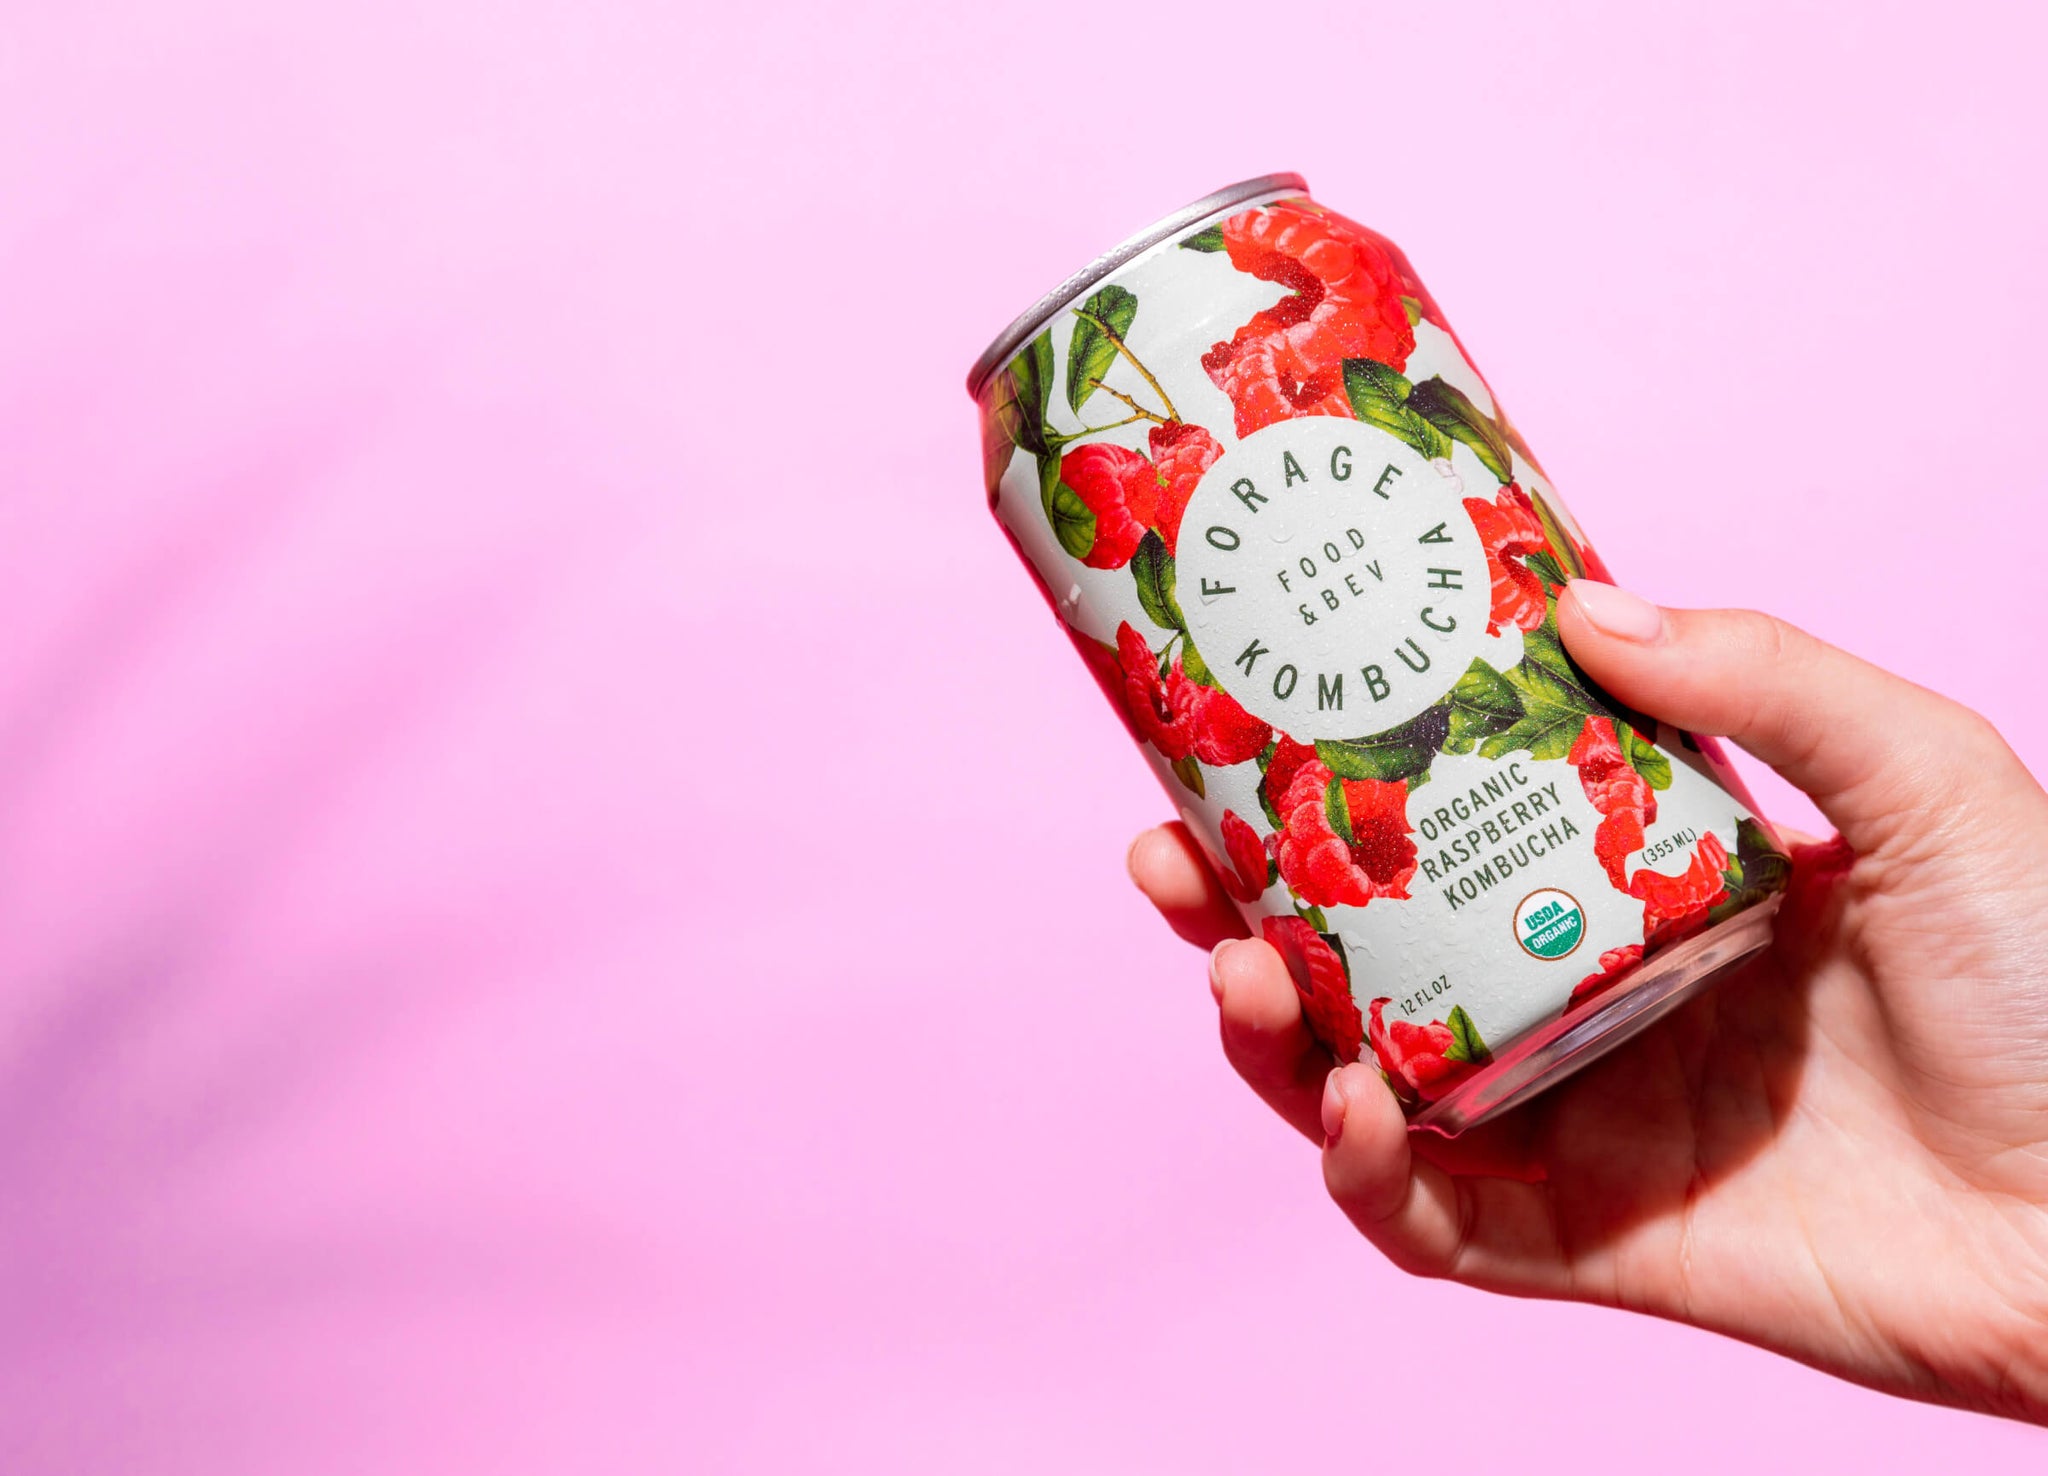 A can of Forage Kombucha held in front of a pink backdrop.